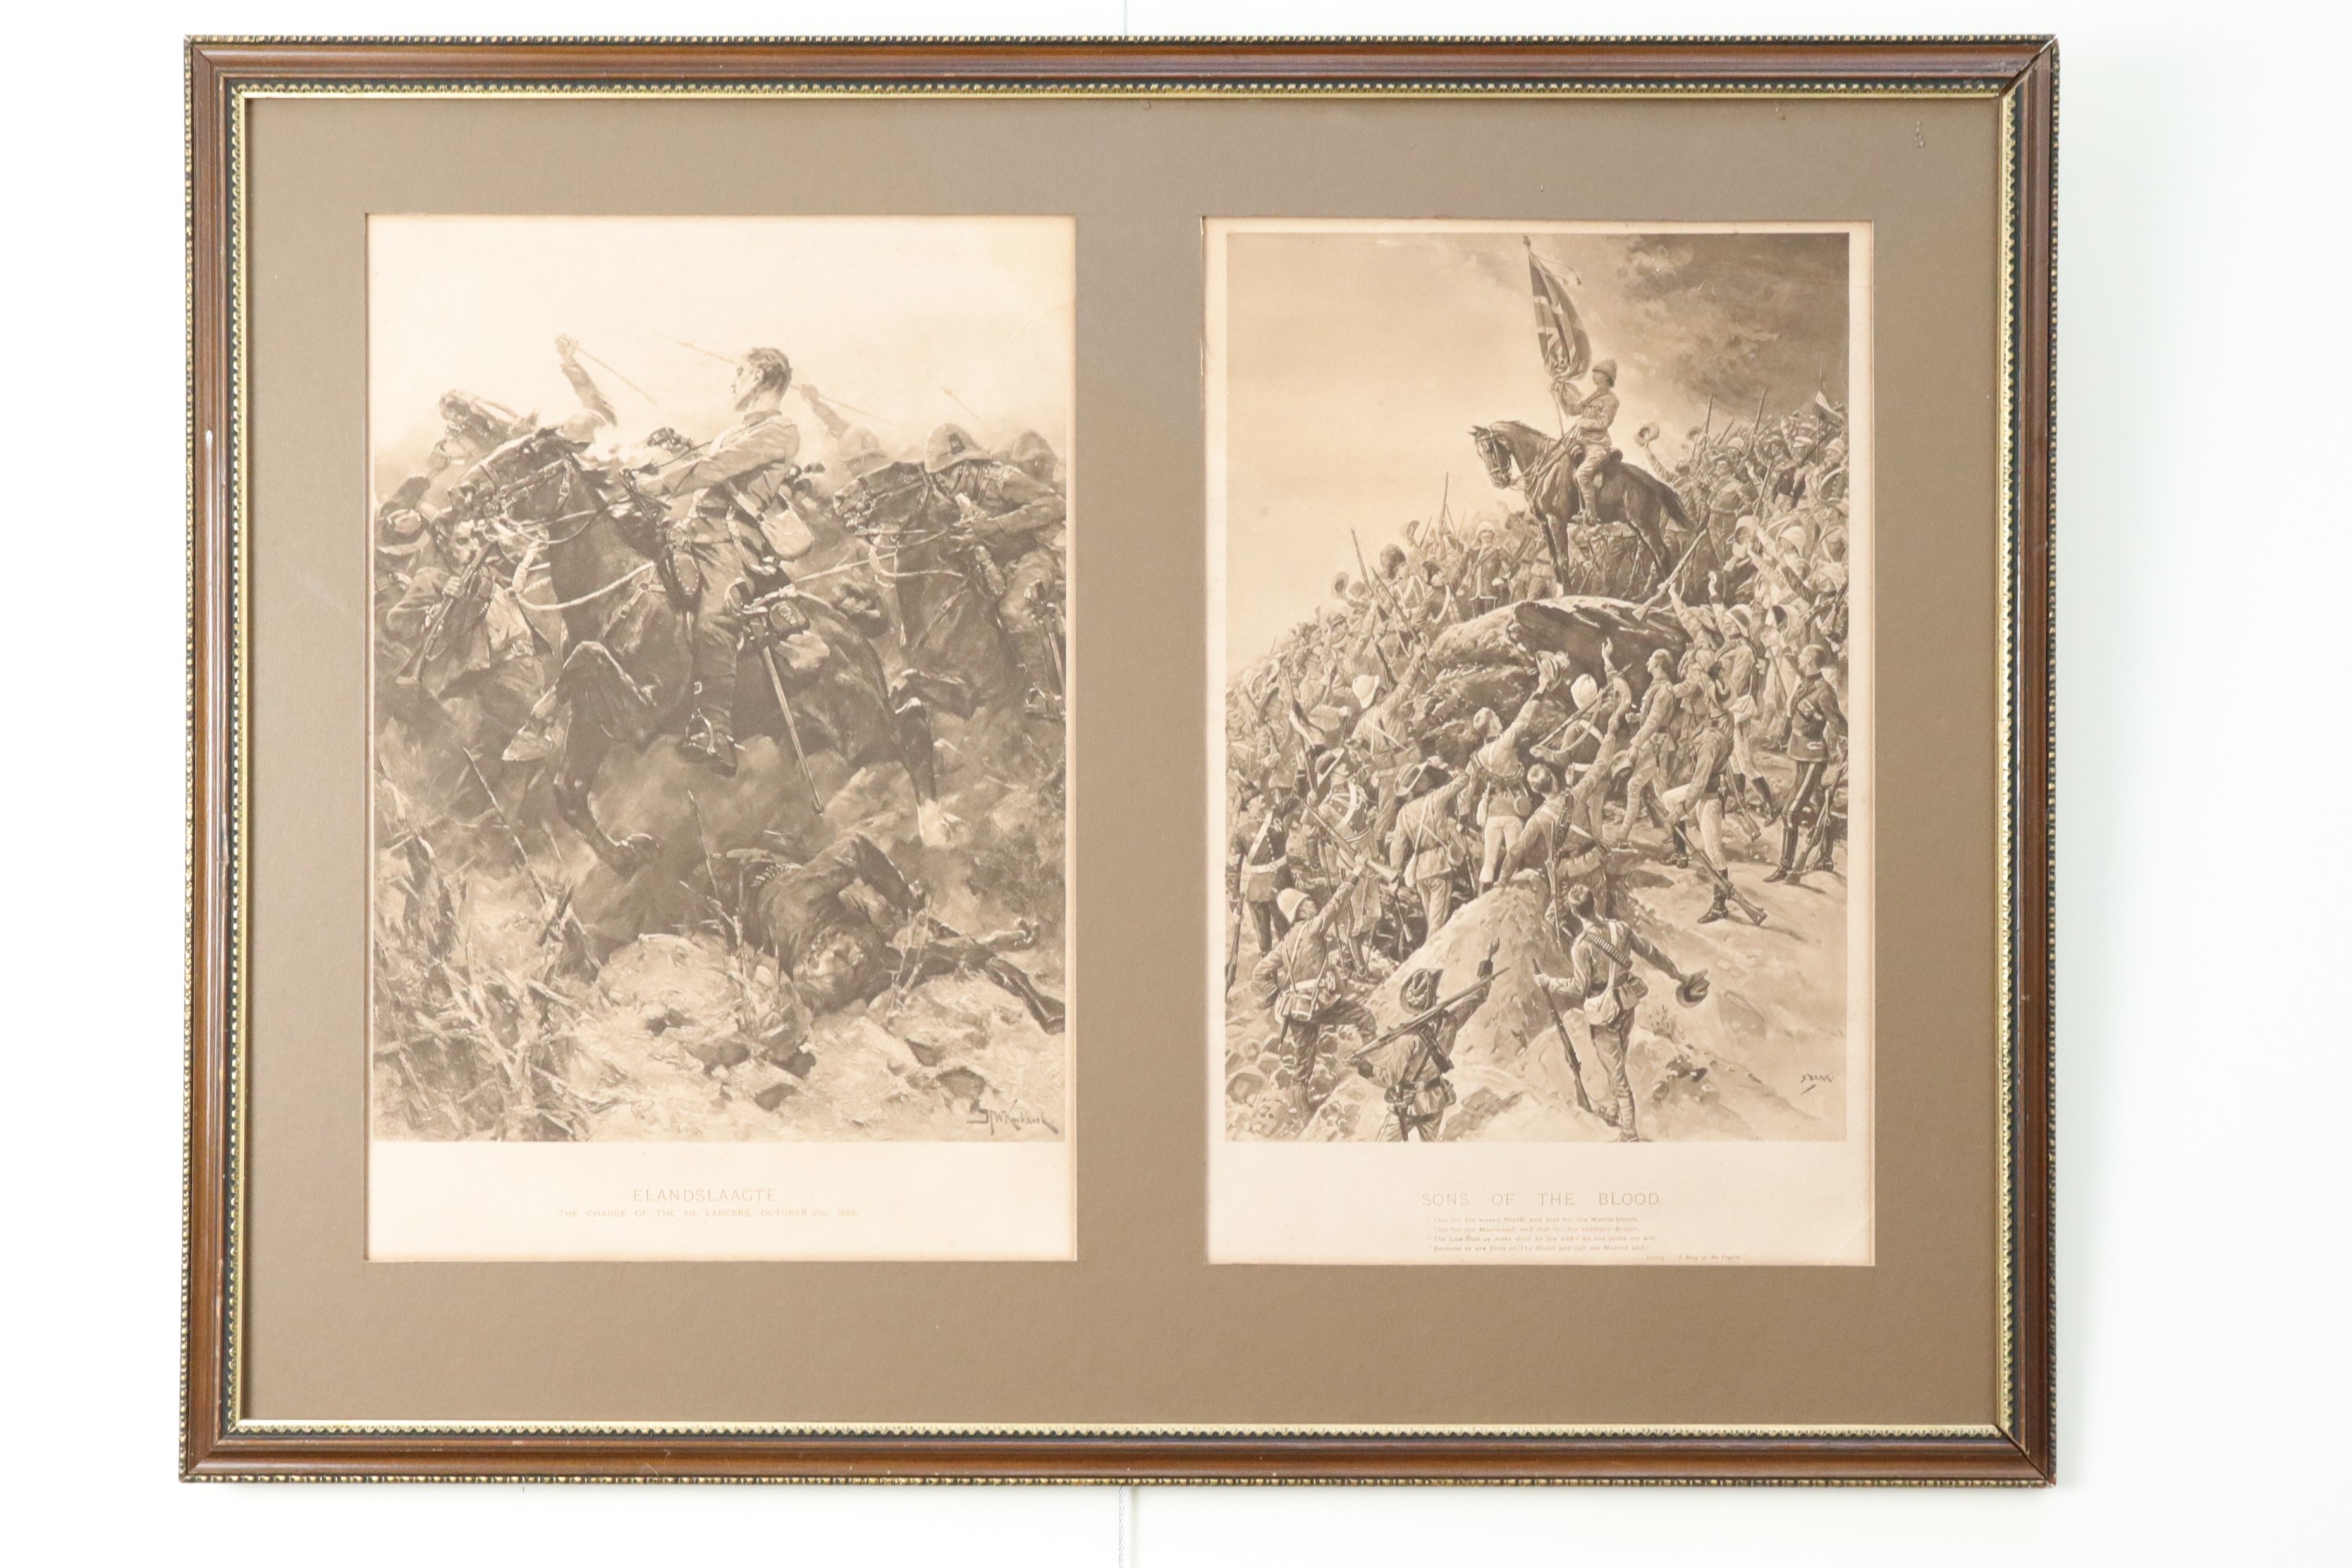 A framed pair of Boer War period sepia prints, "Elandslaagte, the Charge of the 5th Lancers, October